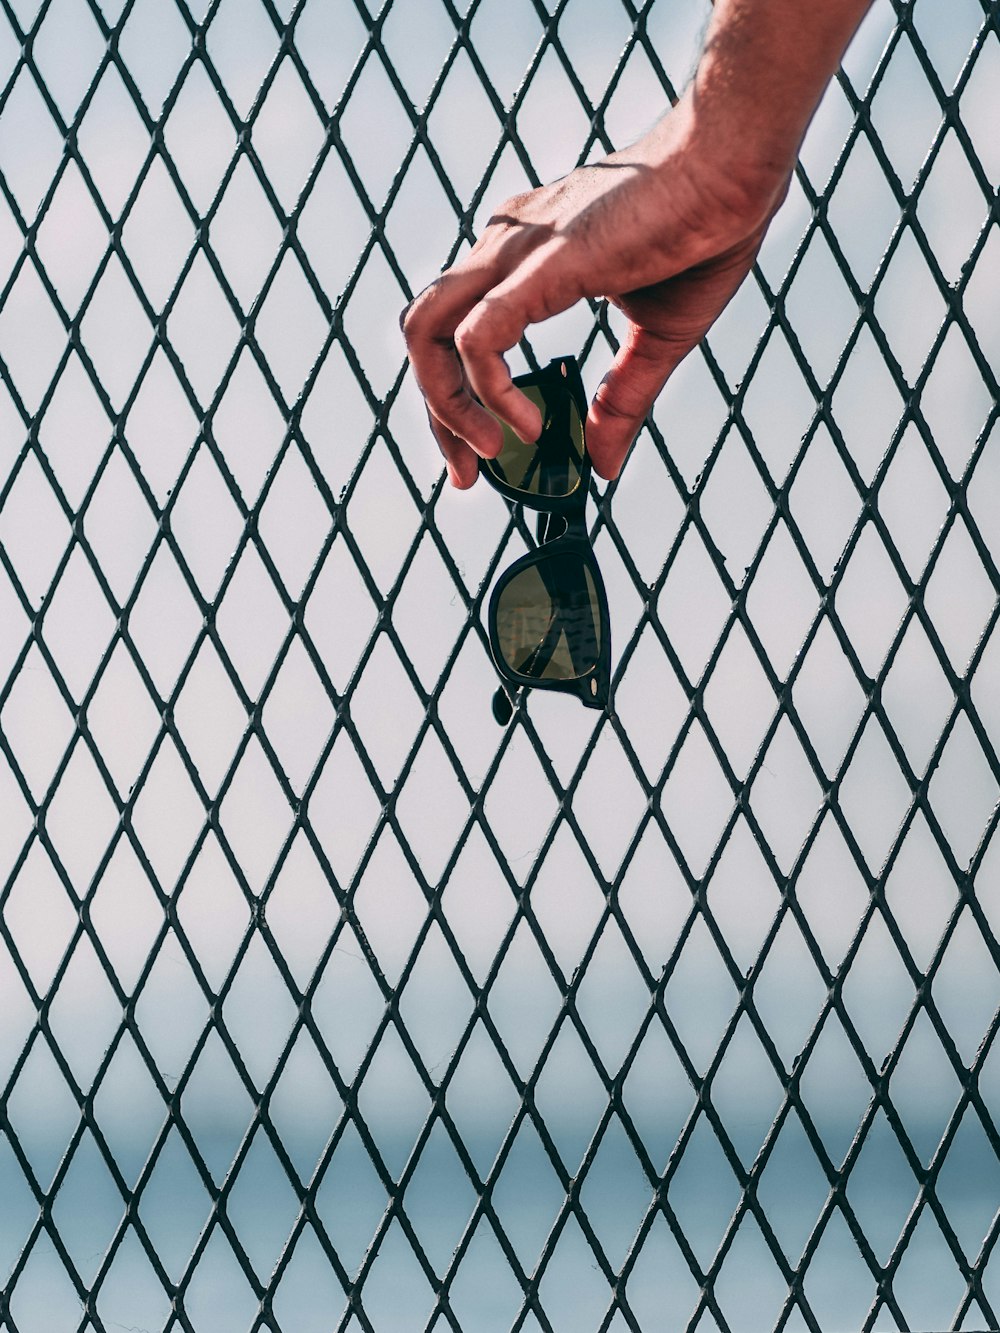 person touching black sunglasses on chain link fence